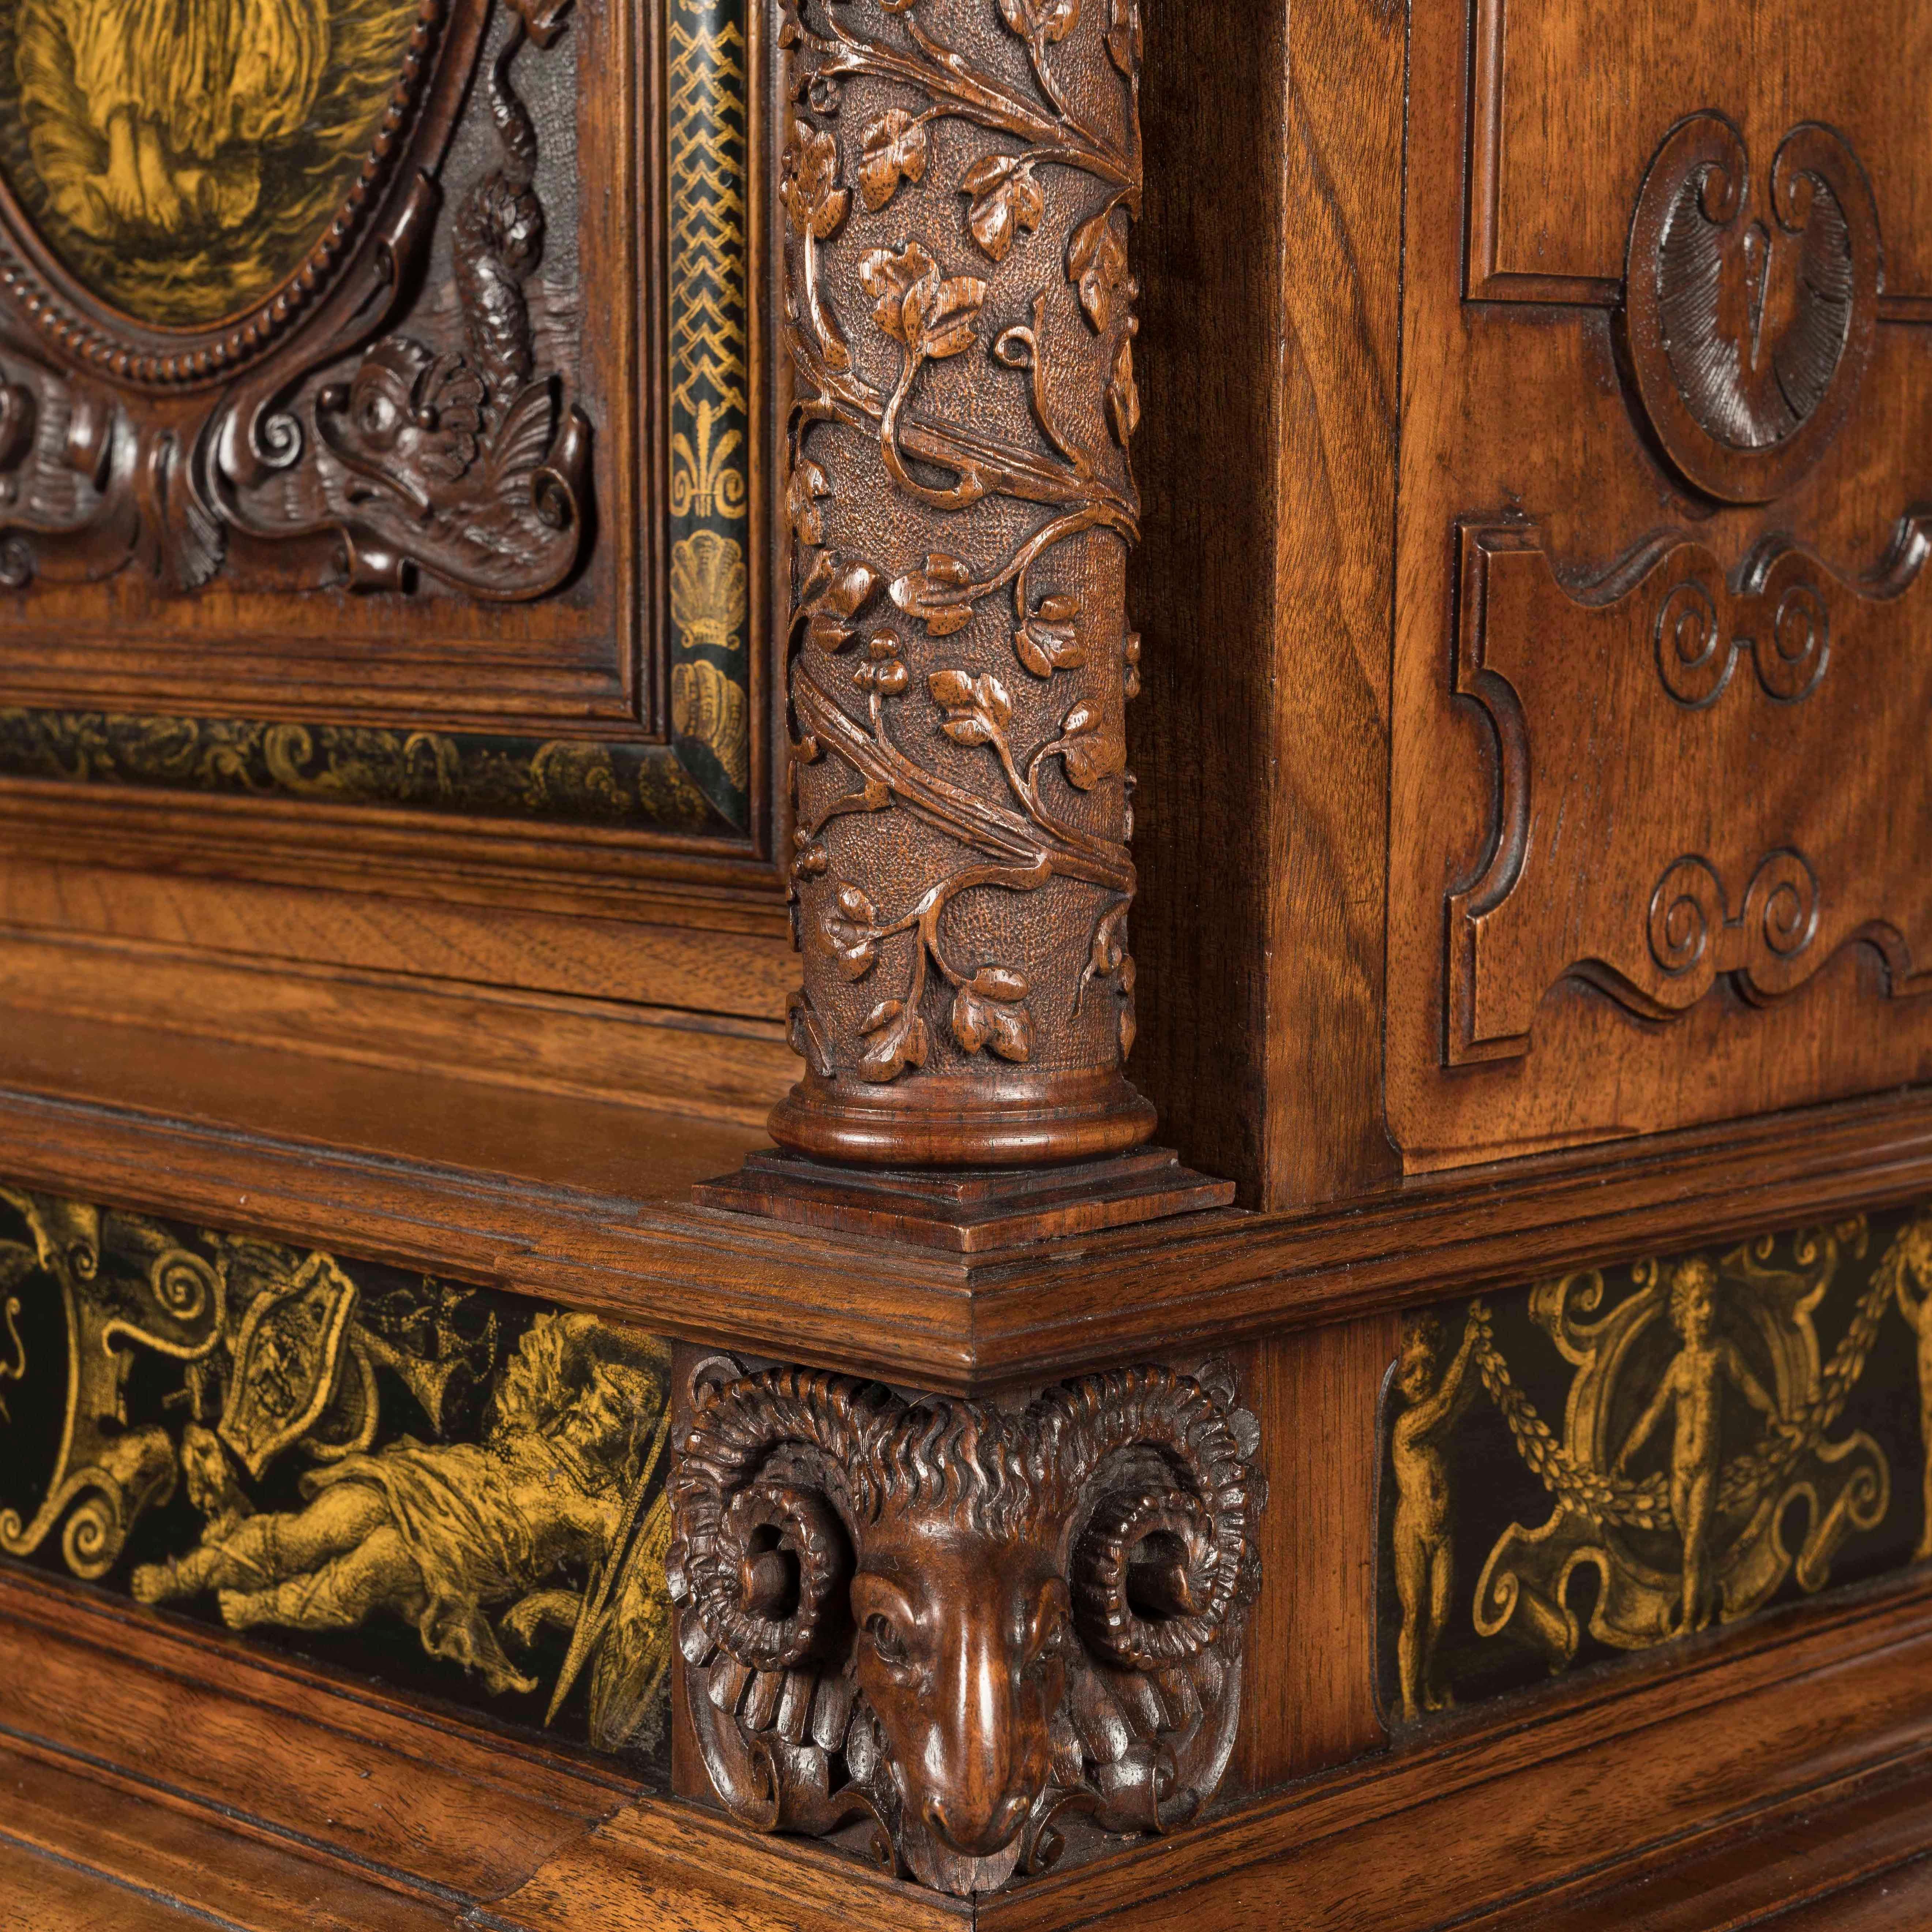 A Gillows Cabinet in the Renaissance Manner

Constructed in walnut, part ebonised, and dressed with convex en grisaille painted plaques; rising from oblate bun feet, having a shaped lower shelf, with an elliptical painted plaque depicting a Roman